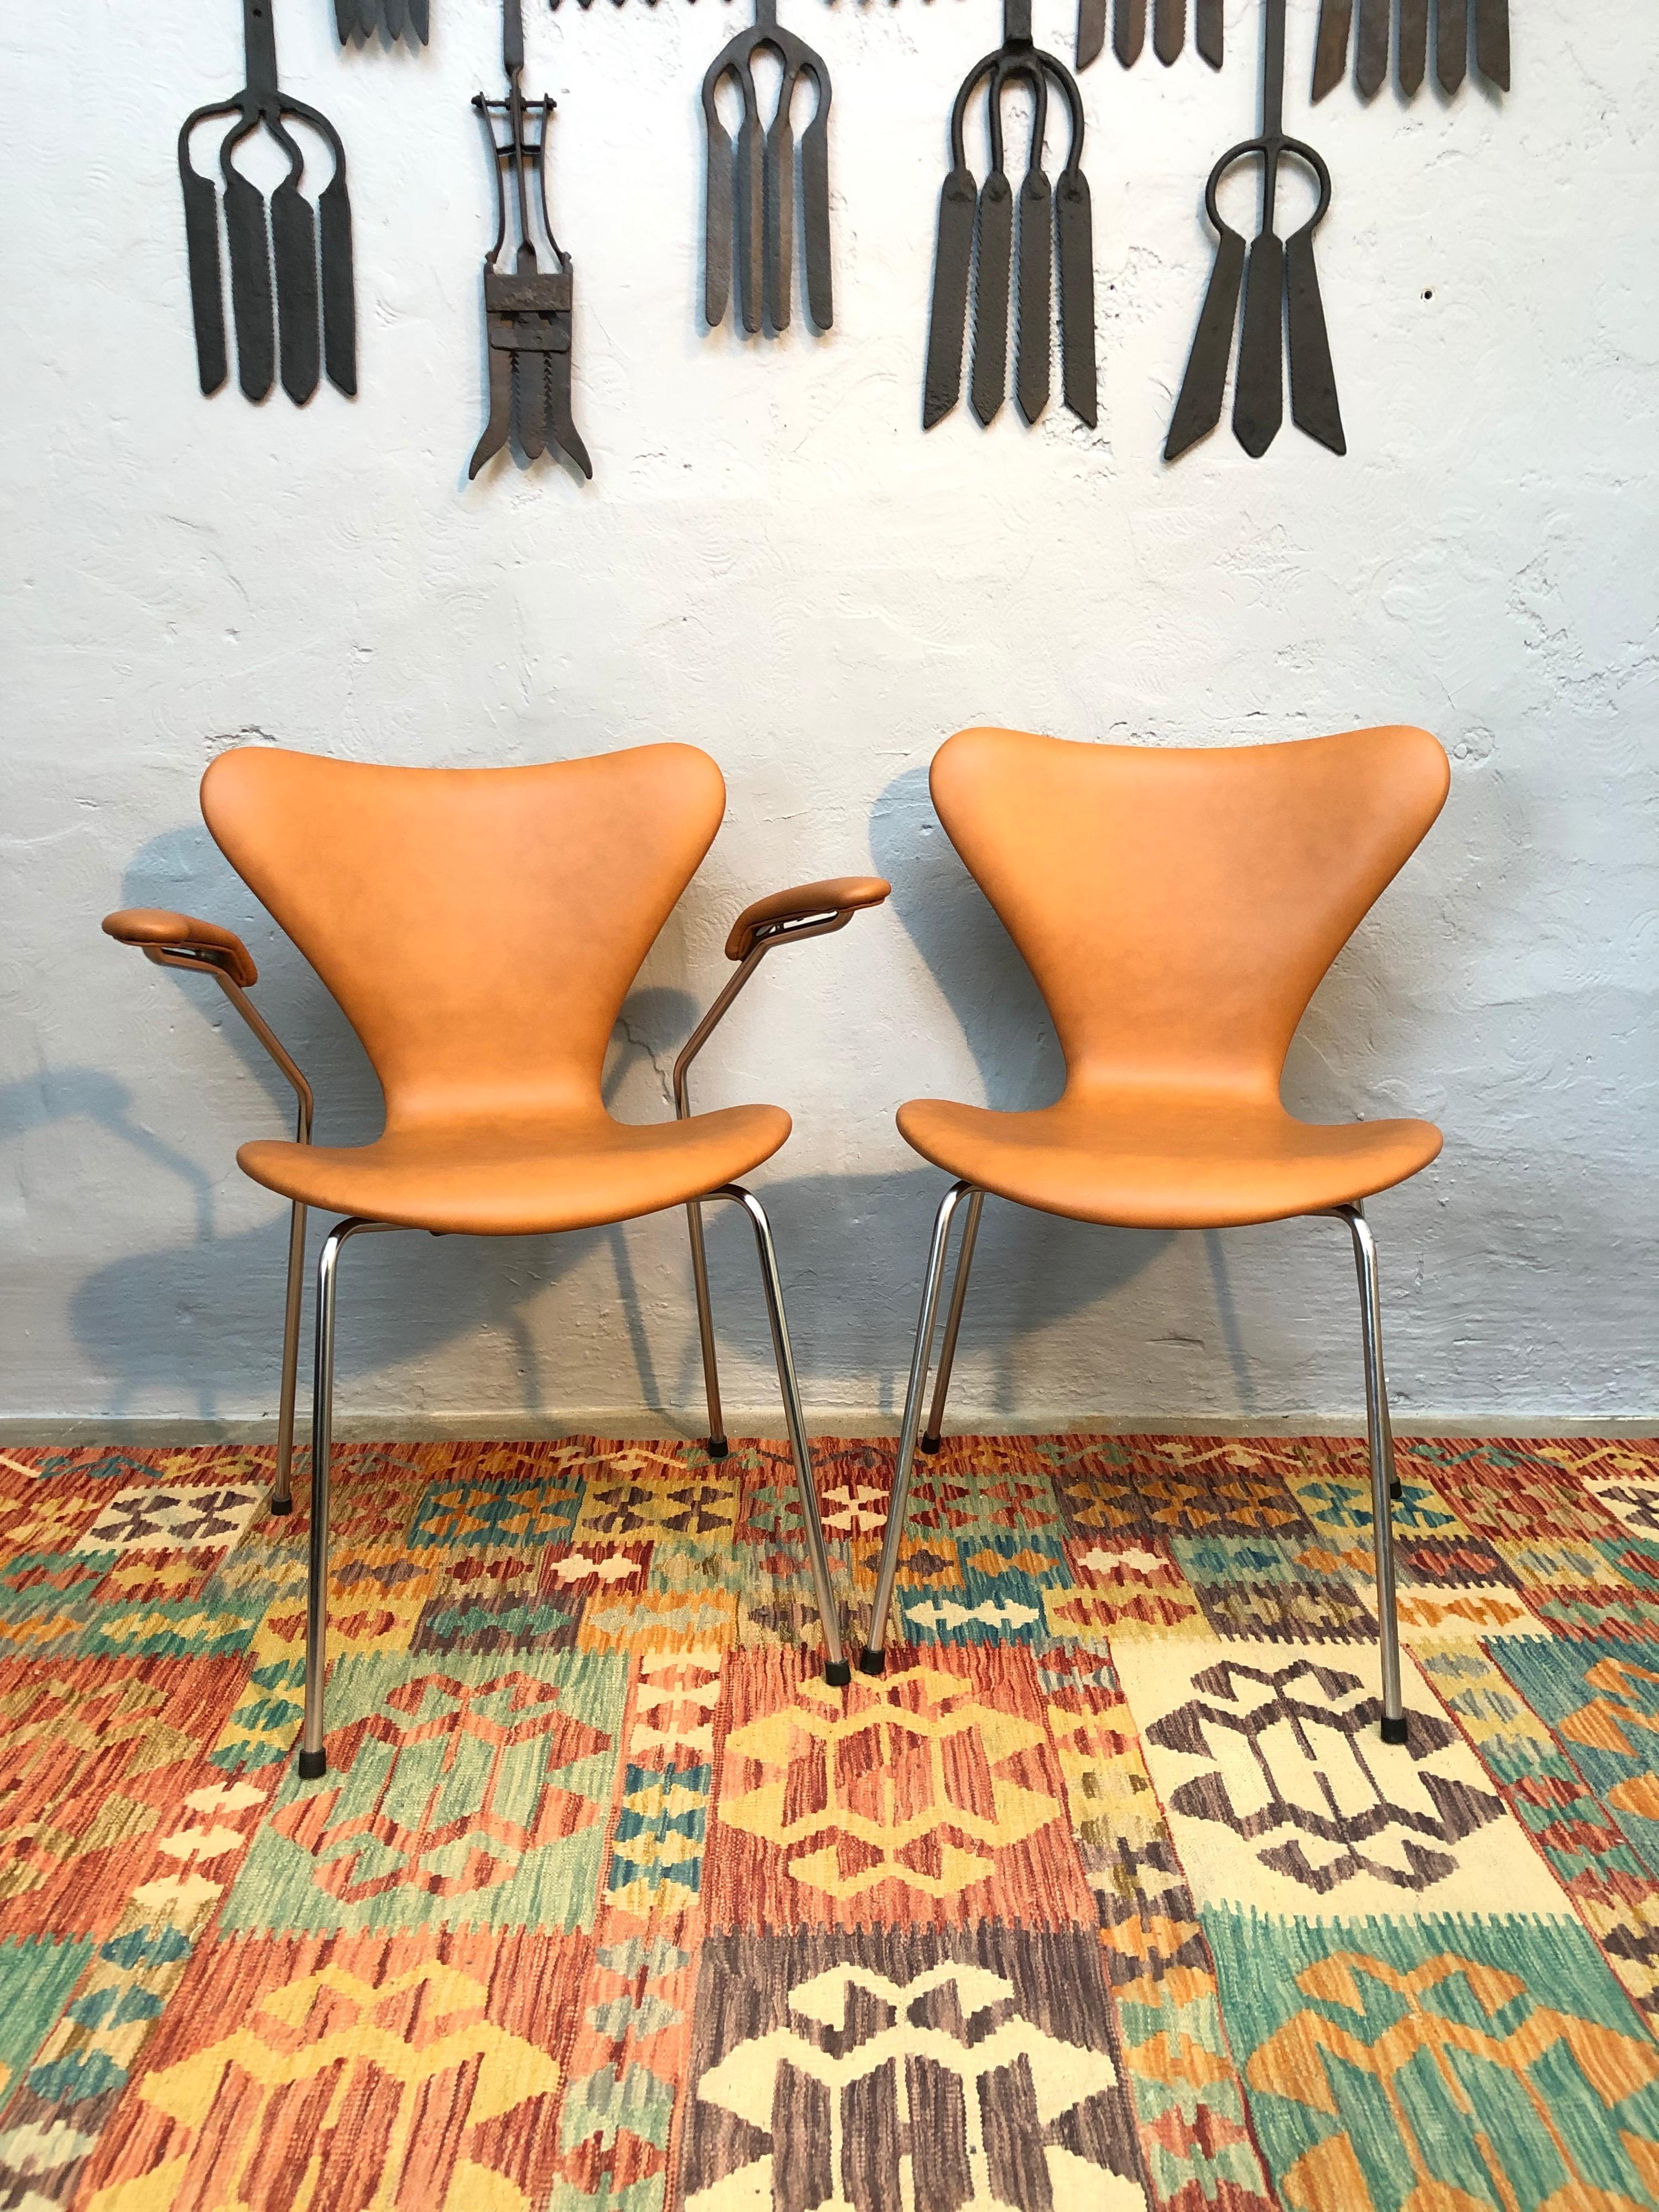 A set of 4 iconic made in Denmark Arne Jacobsen for Fritz Hansen chairs. 
In this set of 4 there are 2 model 3207 with arm rests and 2 model 3107 without. 
Dated and marked on the base 1963/1964. 
This is a very early set of “7” chairs as they are